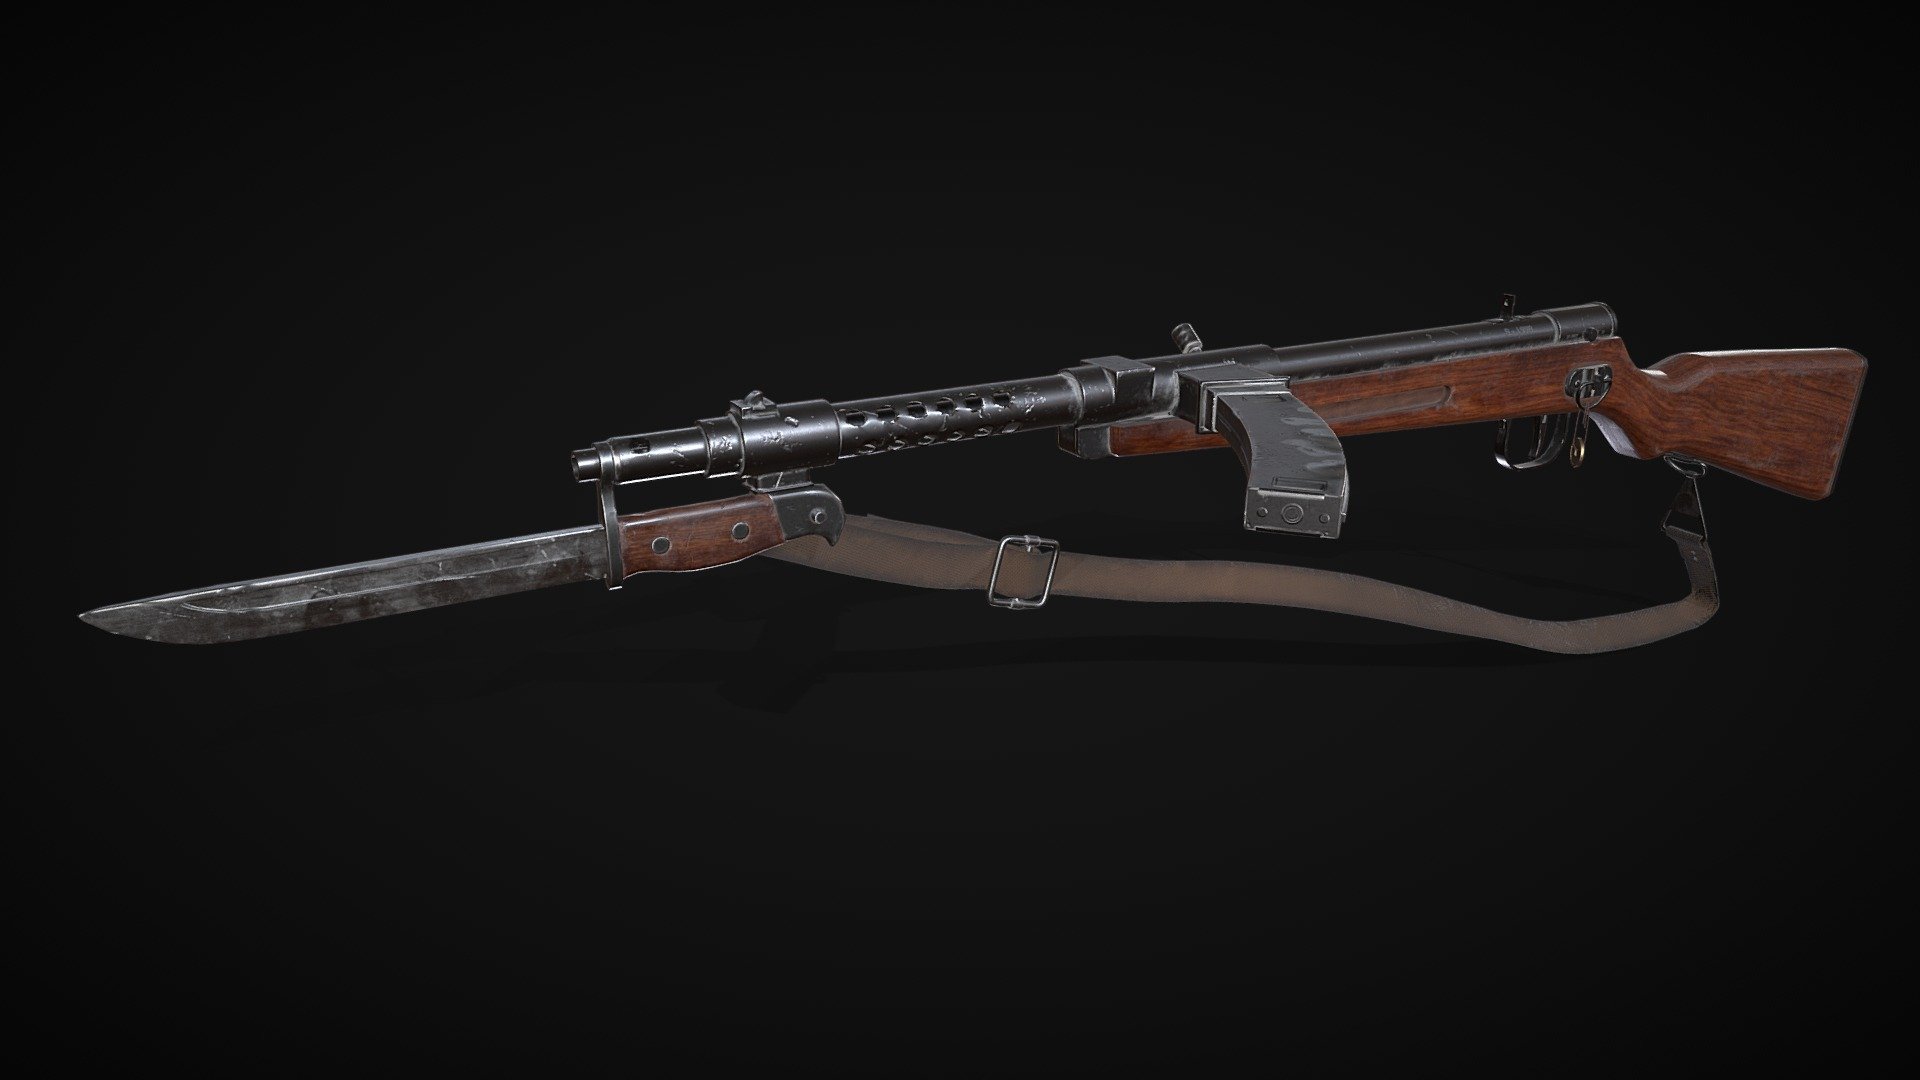 Game ready Type 100. A Japanese submachine gun, used during the second world war. modeled in 3DsMax, textured in substance painter and rendered in Marmoset Toolbag.
https://www.artstation.com/artwork/RYvblX - Type 100 - Submachine gun - 3D model by Sam Mussly (@MusslySam) 3d model